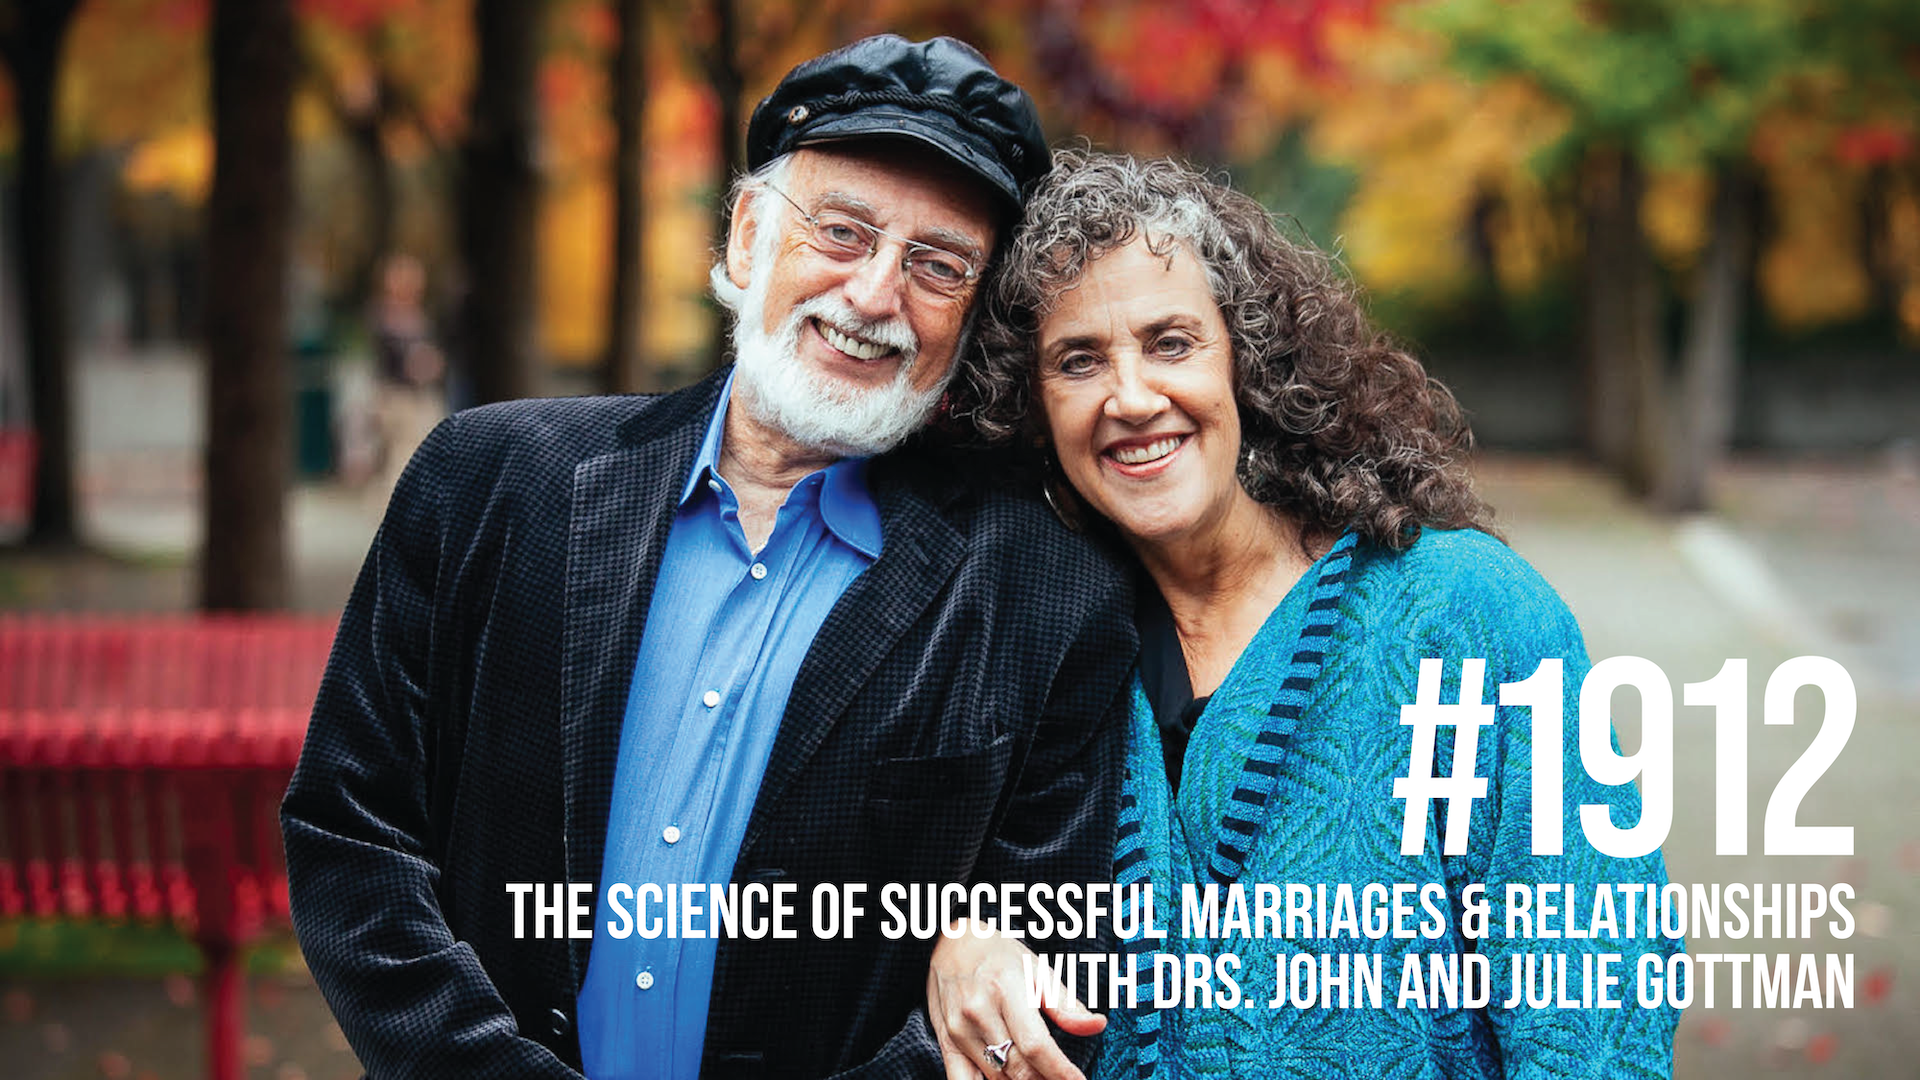 1912: The Science of Successful Marriages & Relationships With Drs. John and Julie Gottman